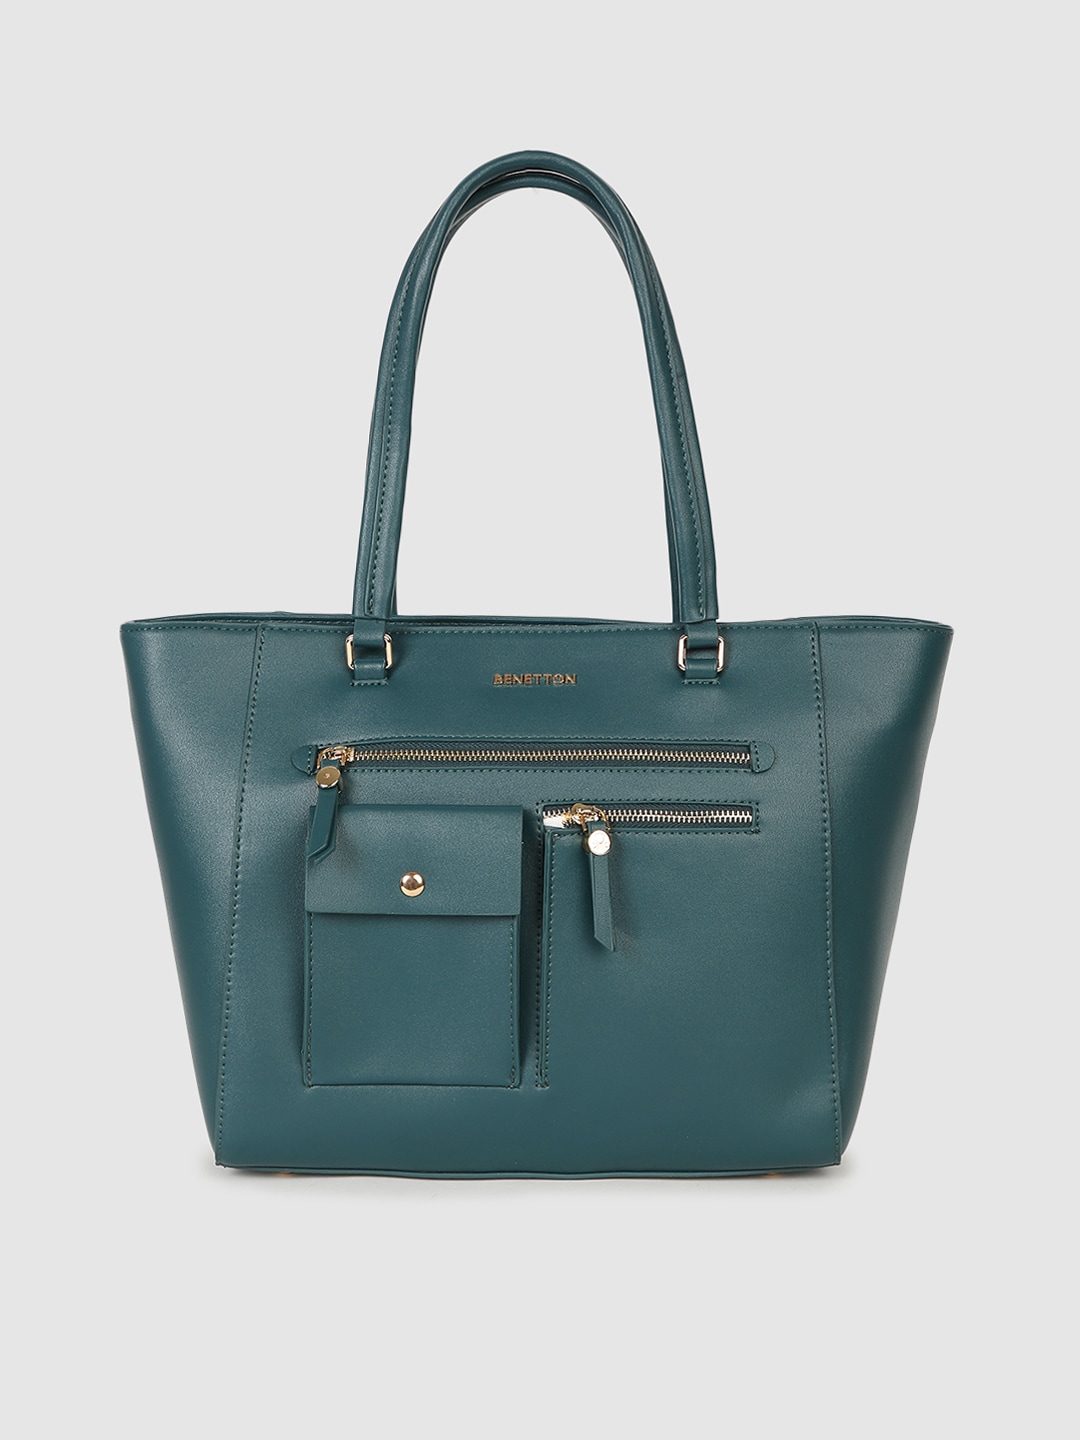 United Colors of Benetton Green Shoulder Bag Price in India